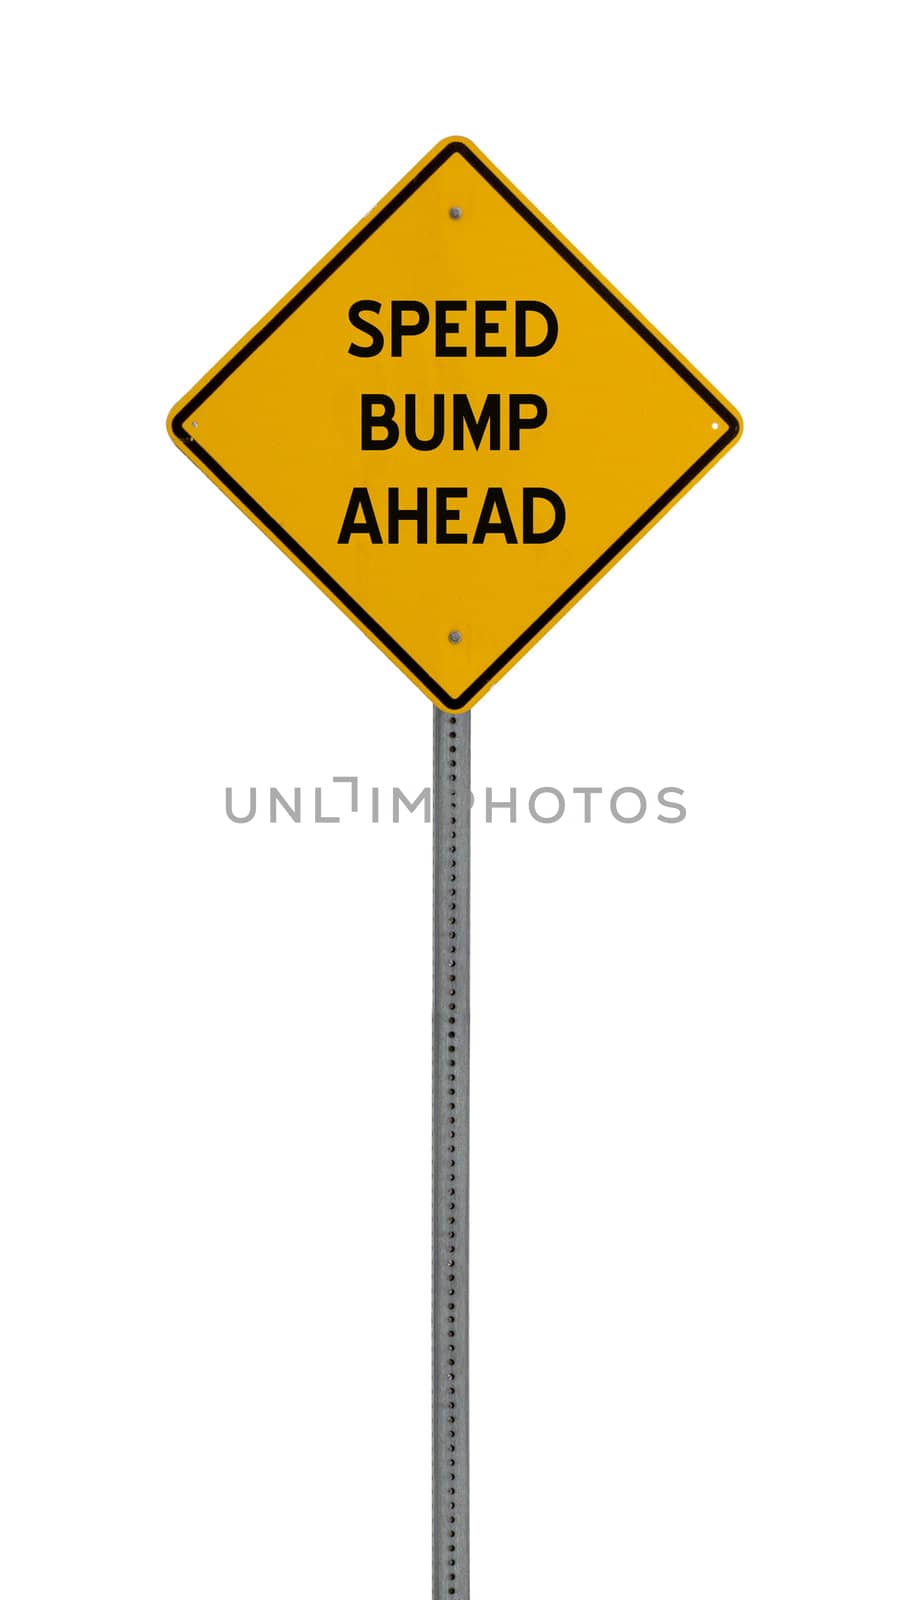 A high quality road sign